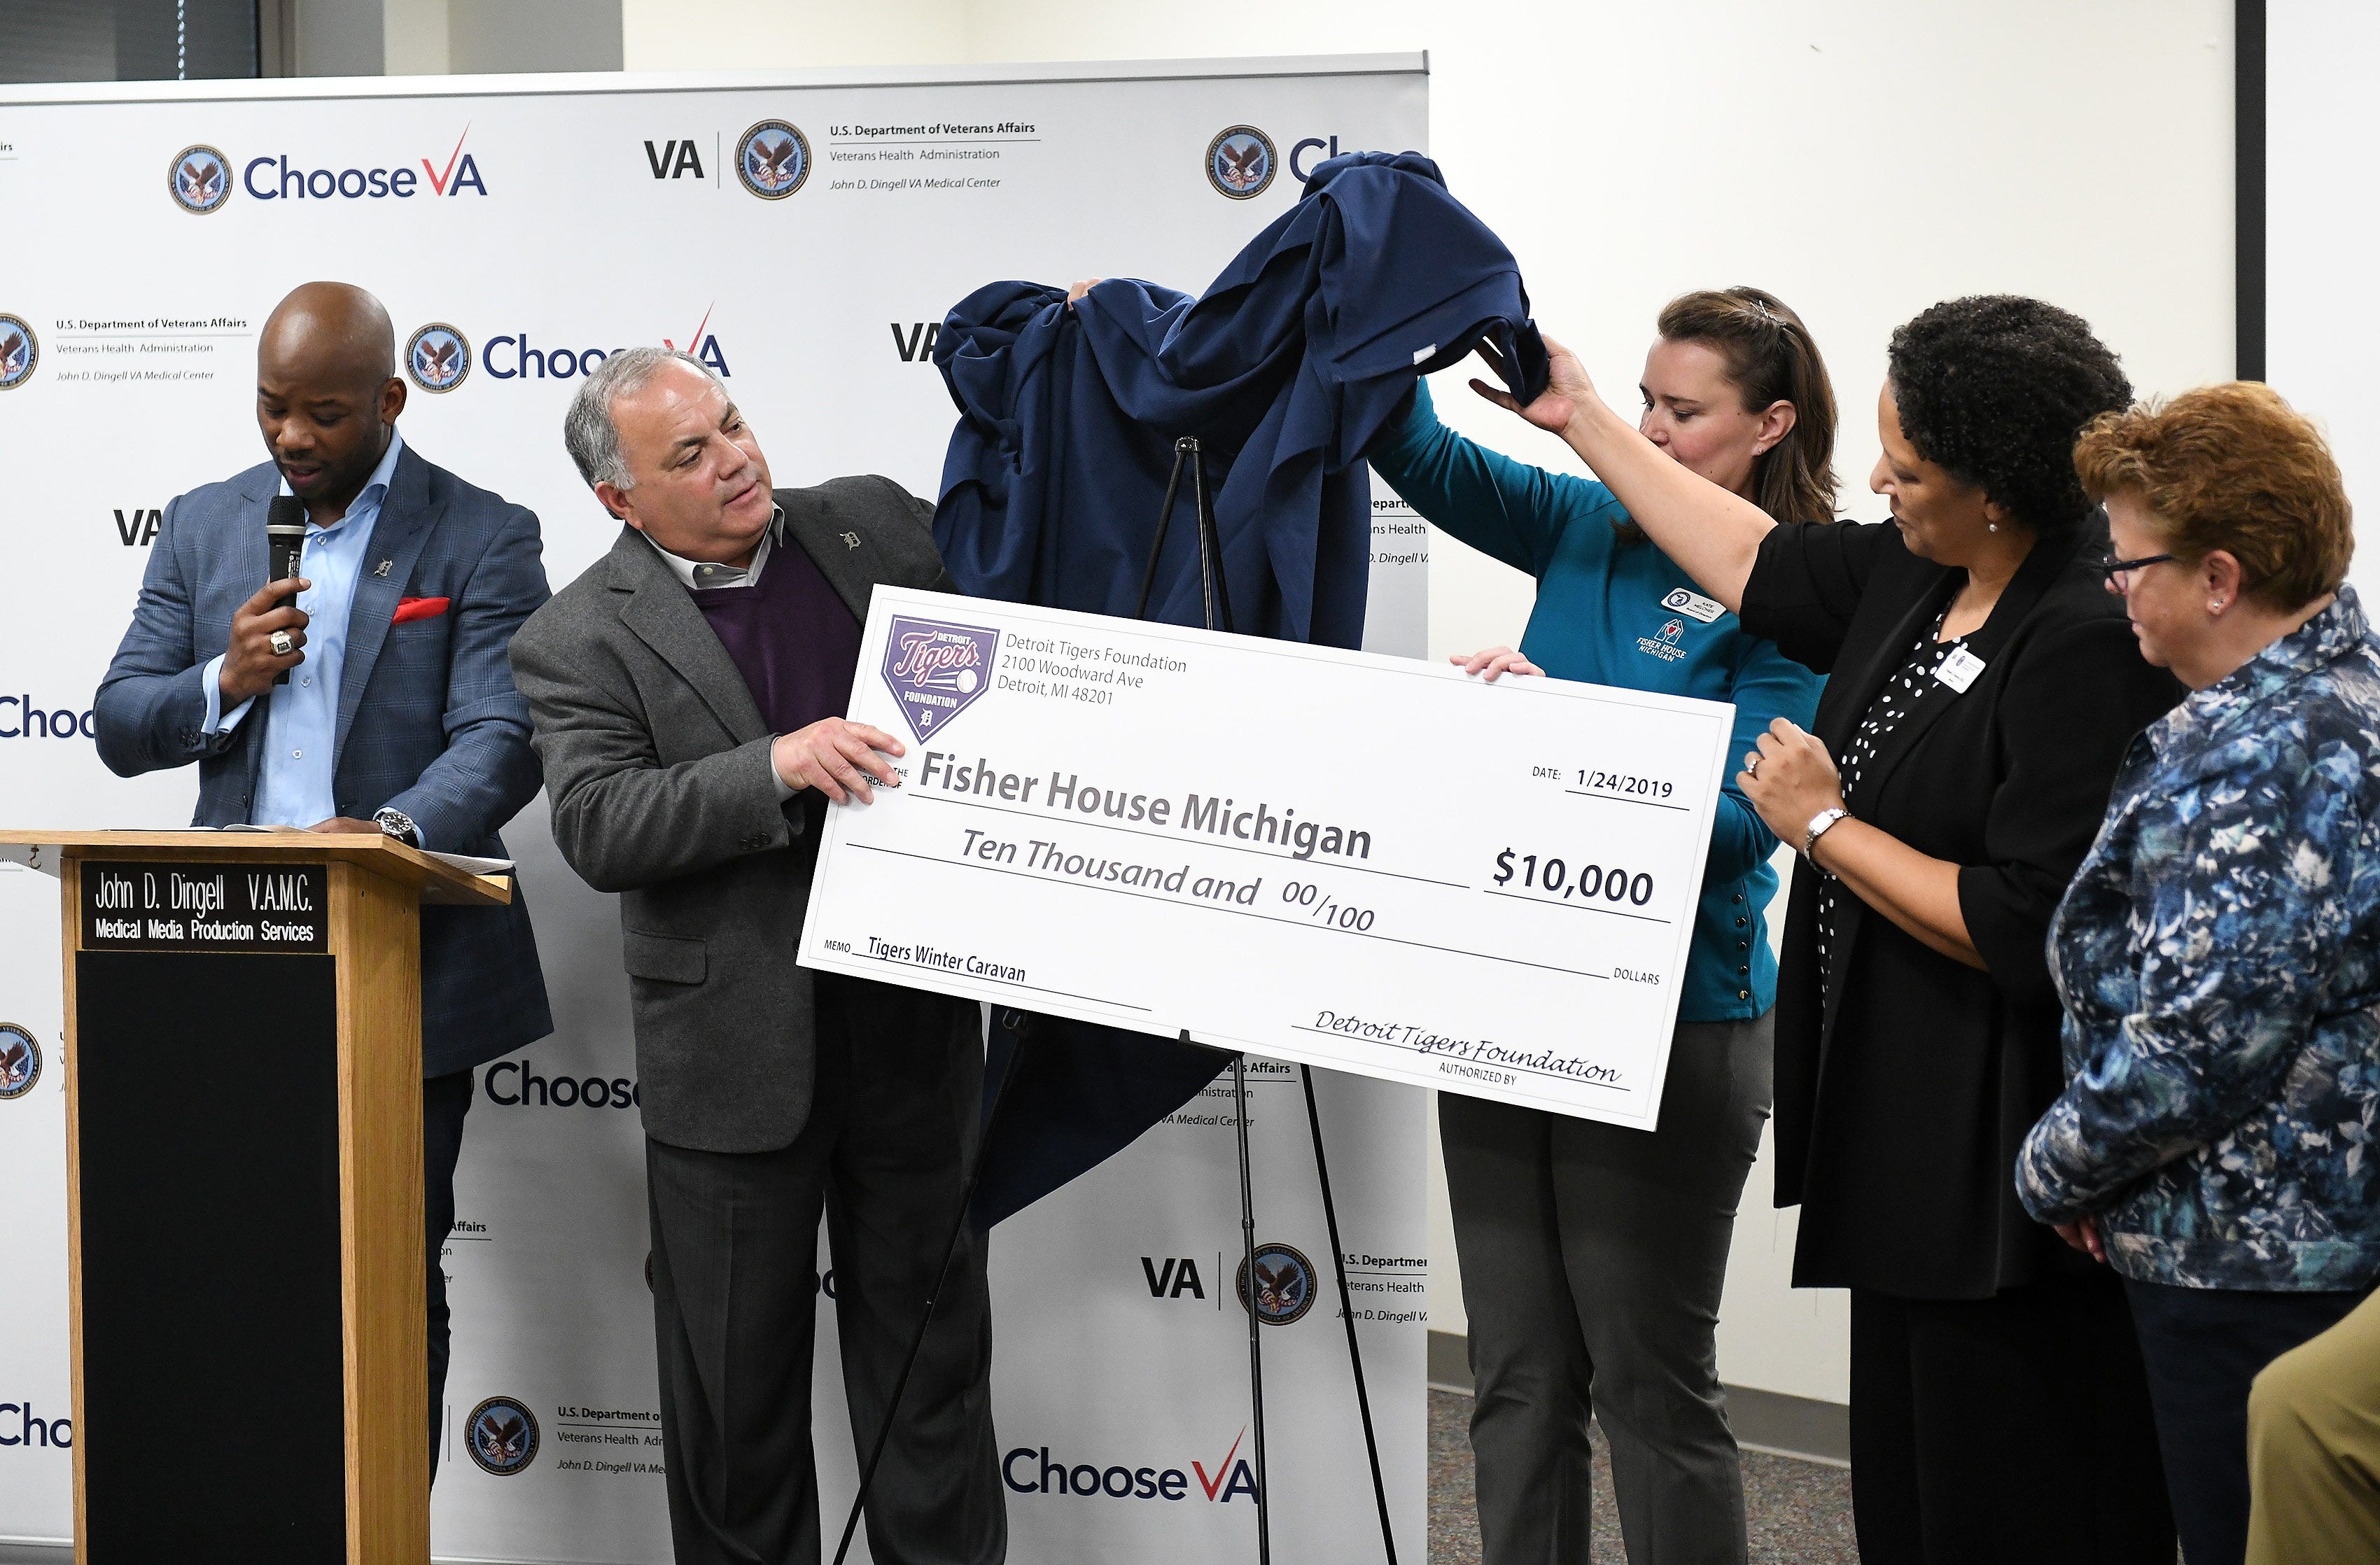 Tigers executive vice president of baseball operations and general manager Al Avila unveils a check towards the Fisher House which will be built near the VA Medical Center during a stop on the 2019 Detroit Tigers Winter Caravan at the John D. Dingell VA Medical Center in Detroit on Jan. 24, 2019.